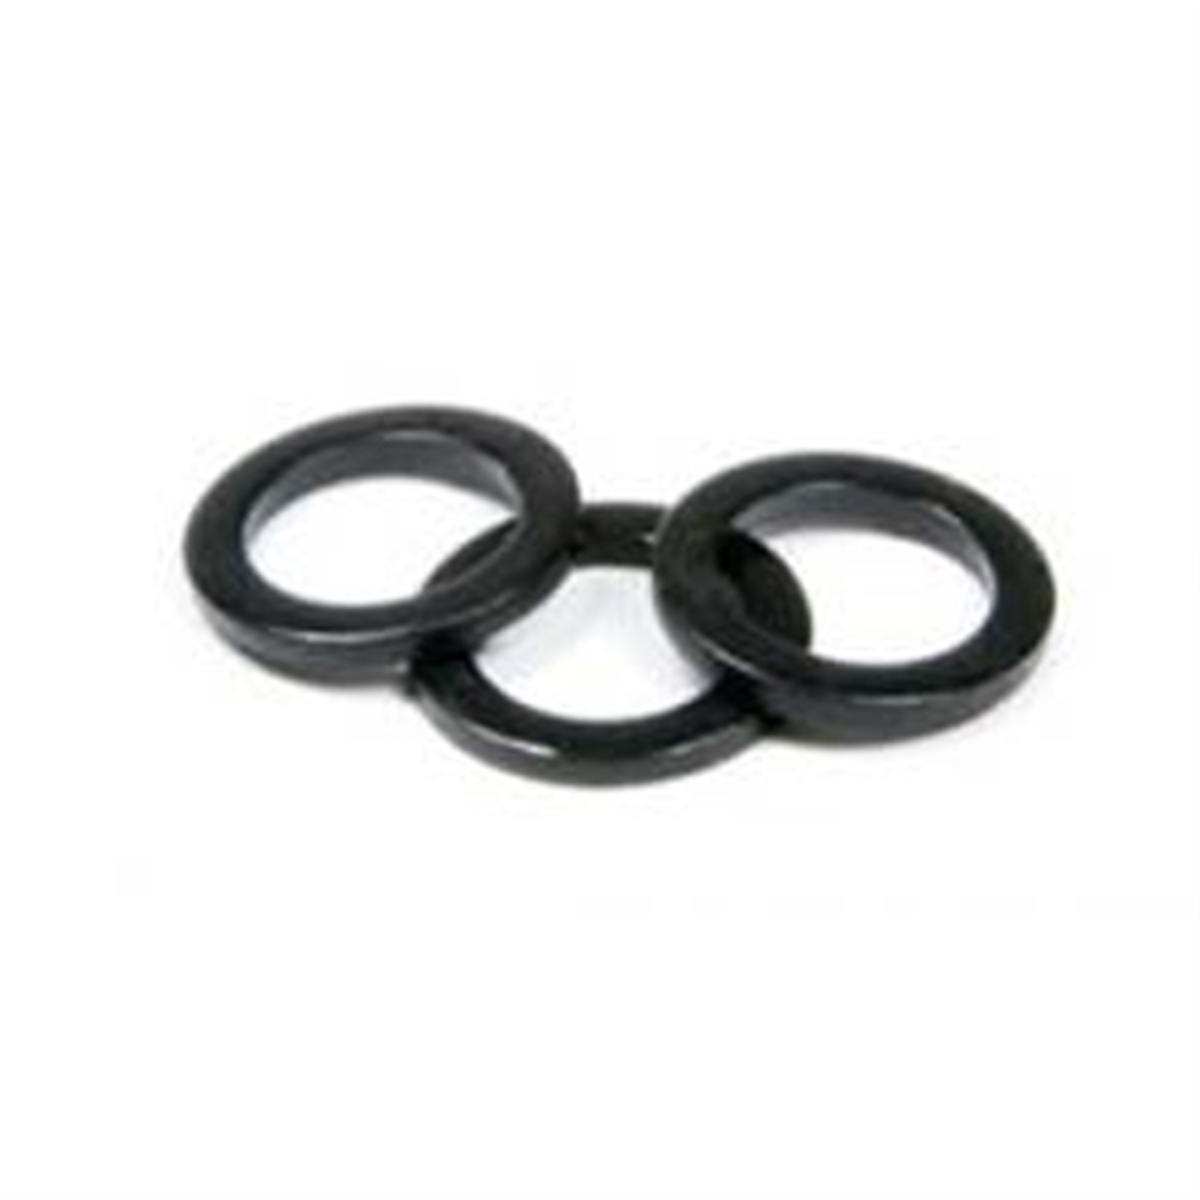 SM ARBOR WASHER - 3PACK